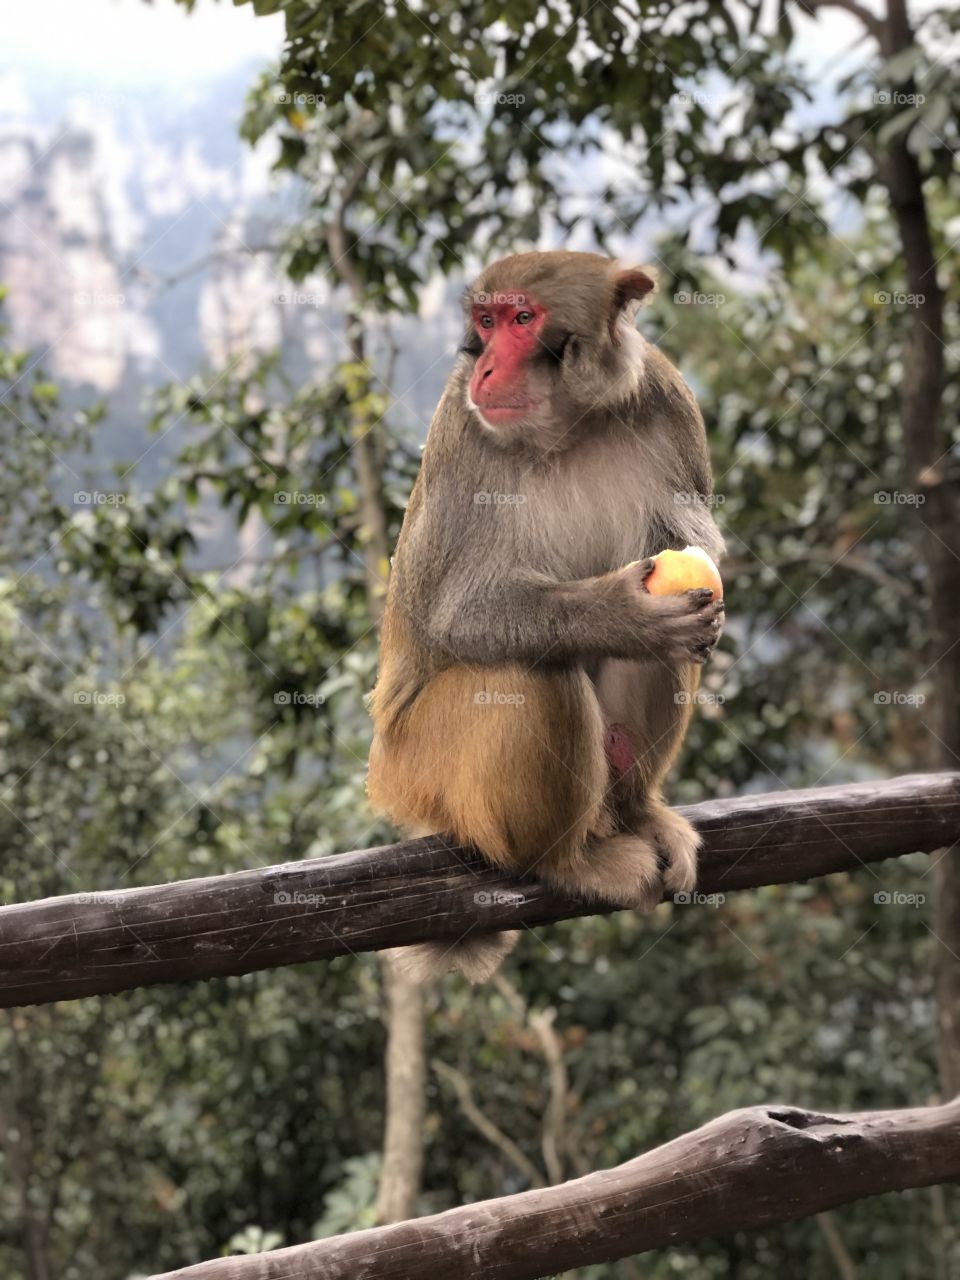 A monkey with an apple 